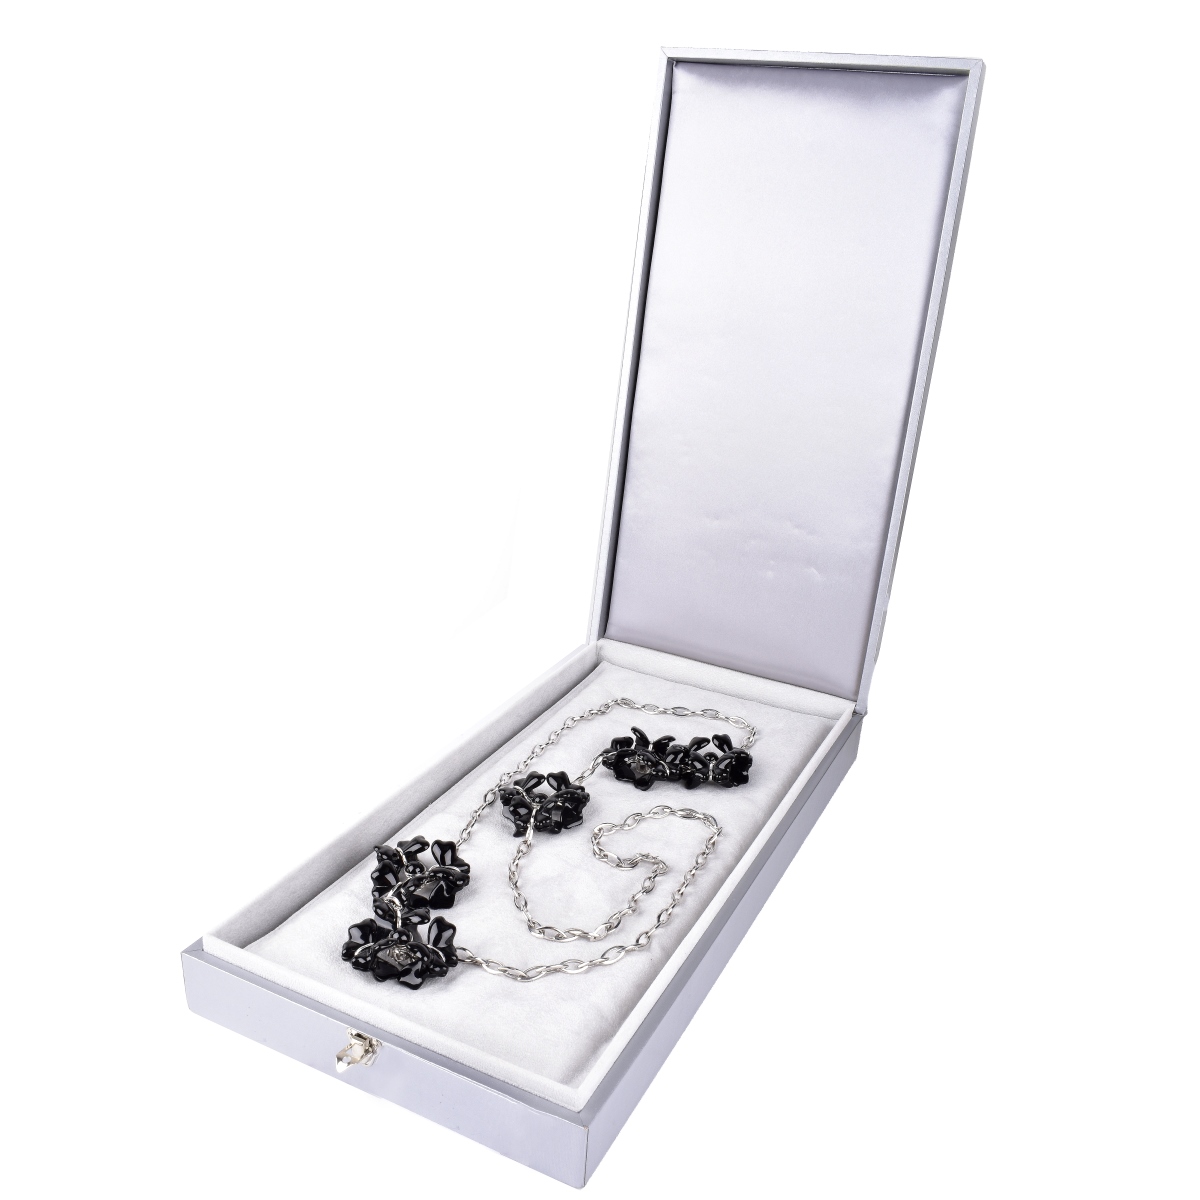 Lalique Black Crystal Necklace and Ring